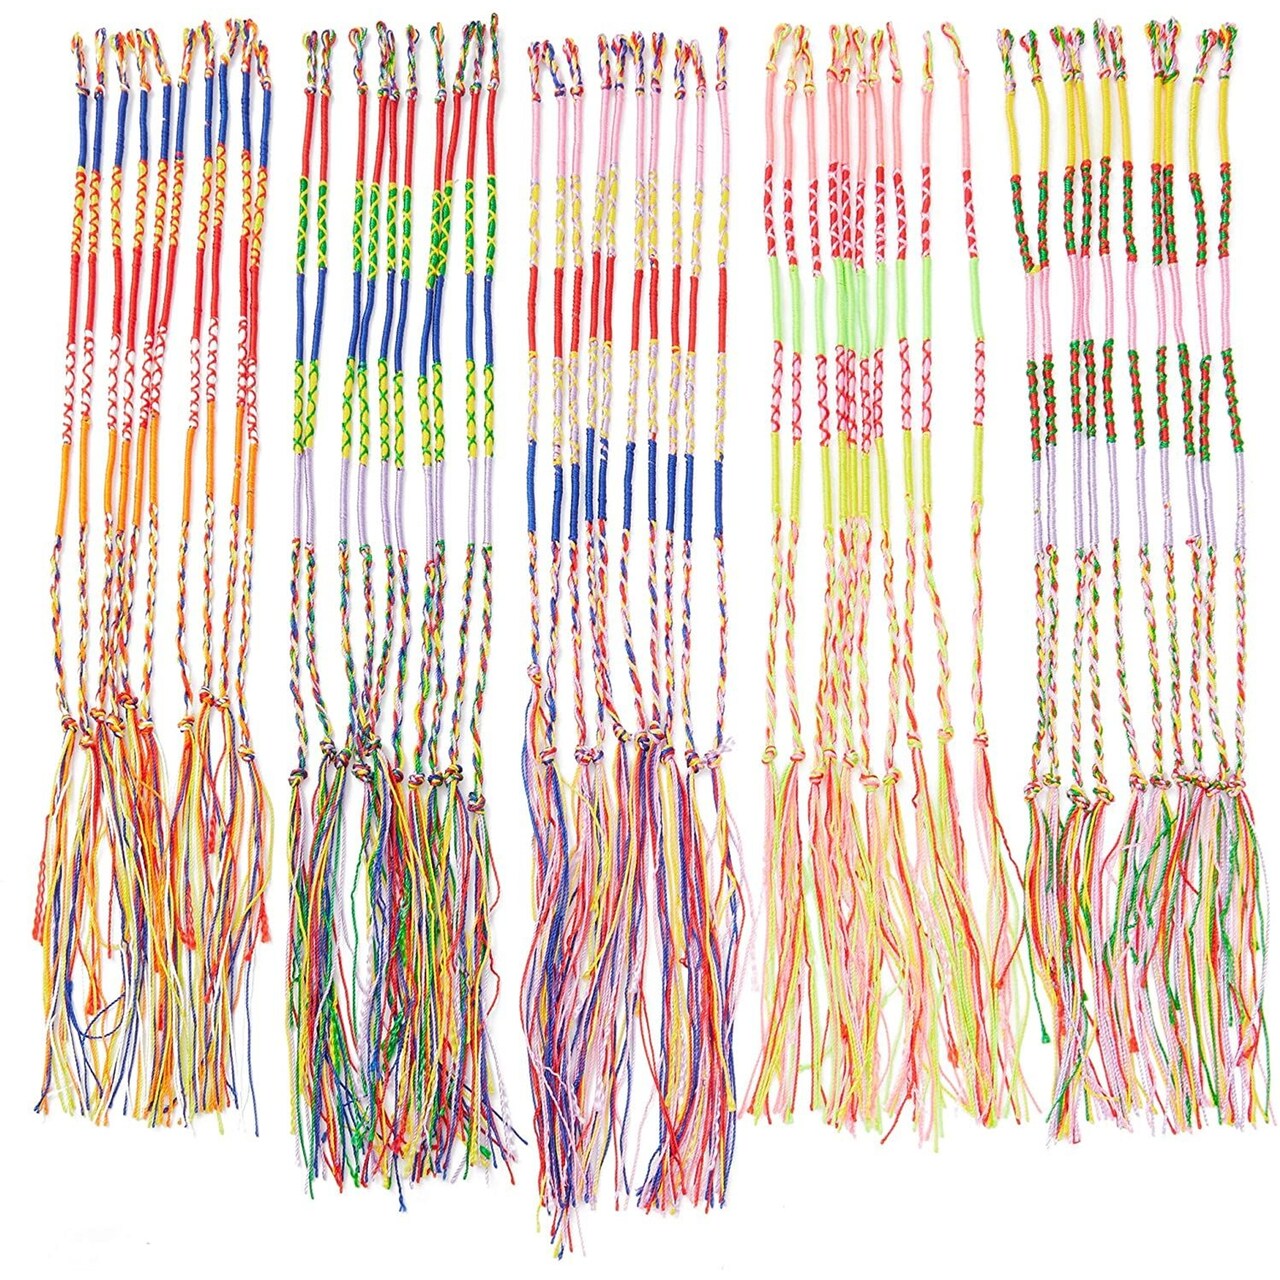 Bright Creations Friendship Bracelets Set (100 Count), Multicolored, One Size